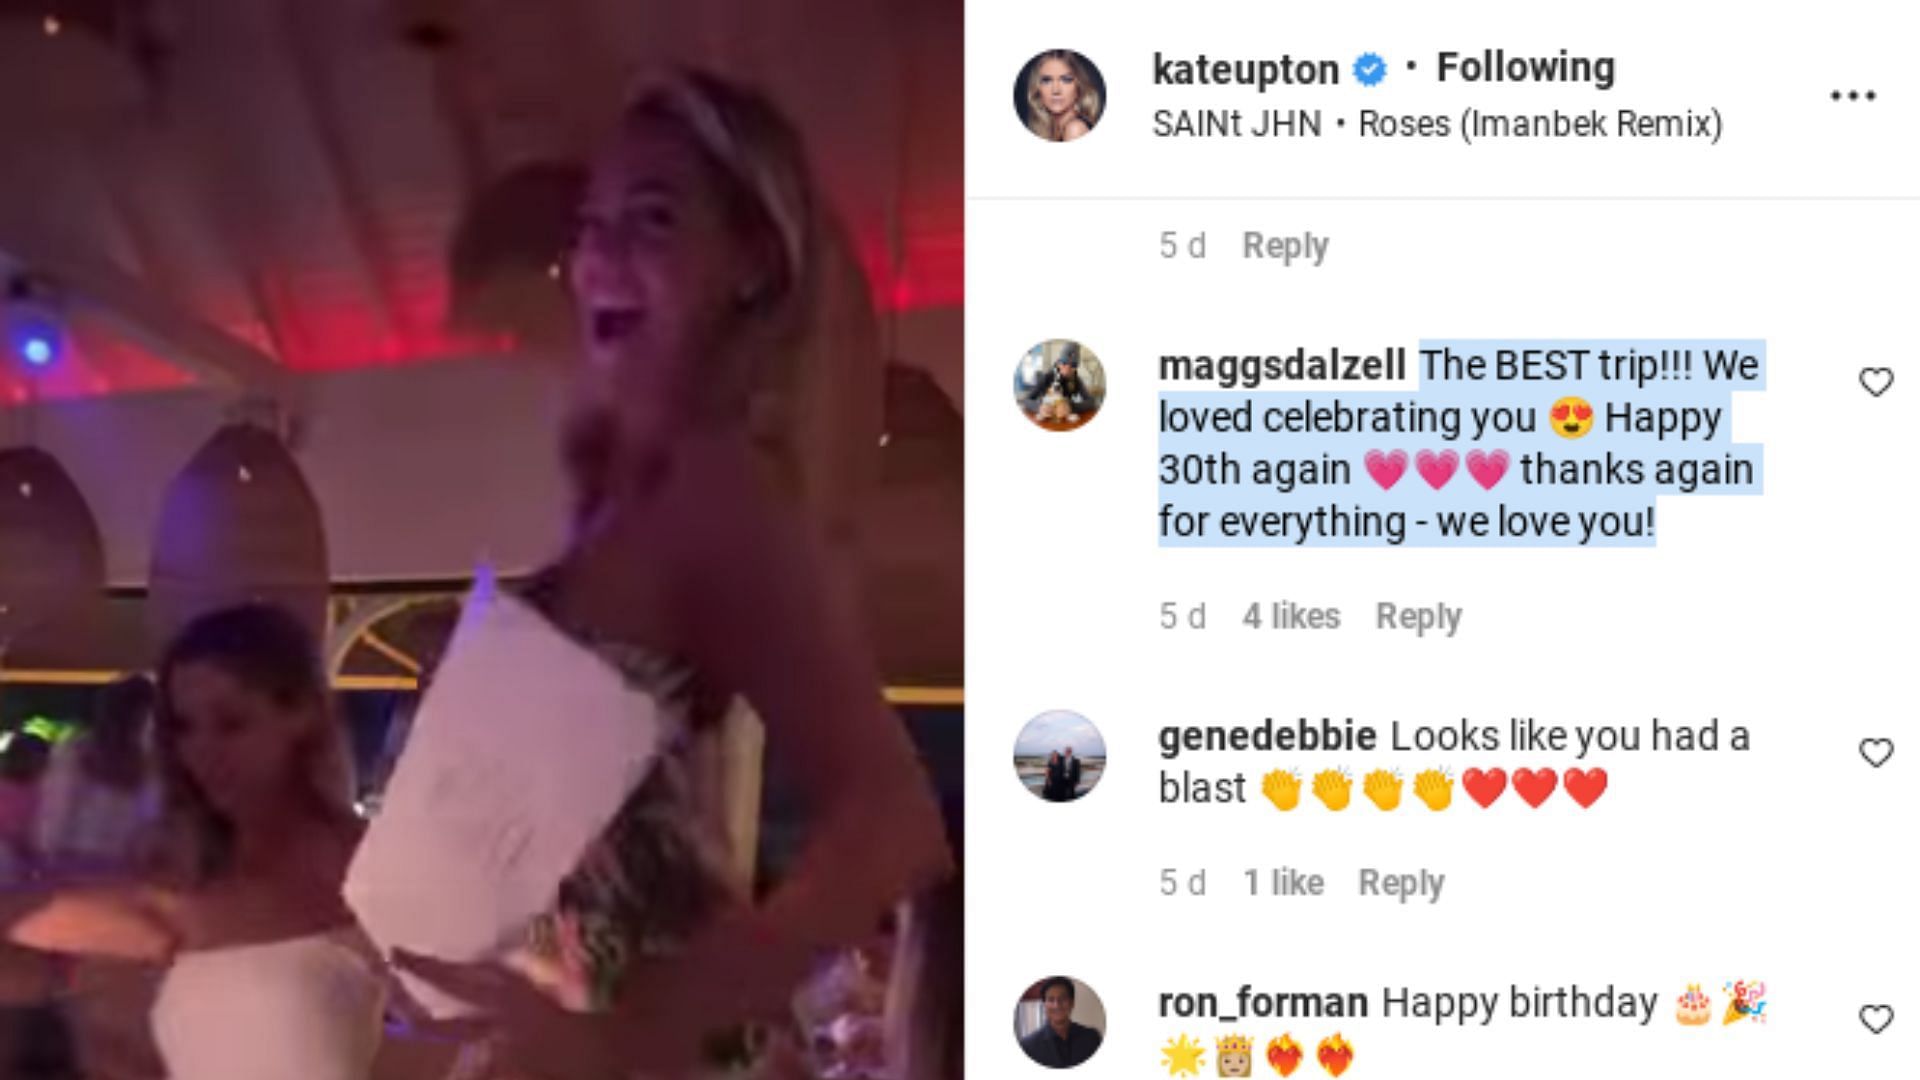 Magi leaves a comment on Kate&#039;s IG Post.